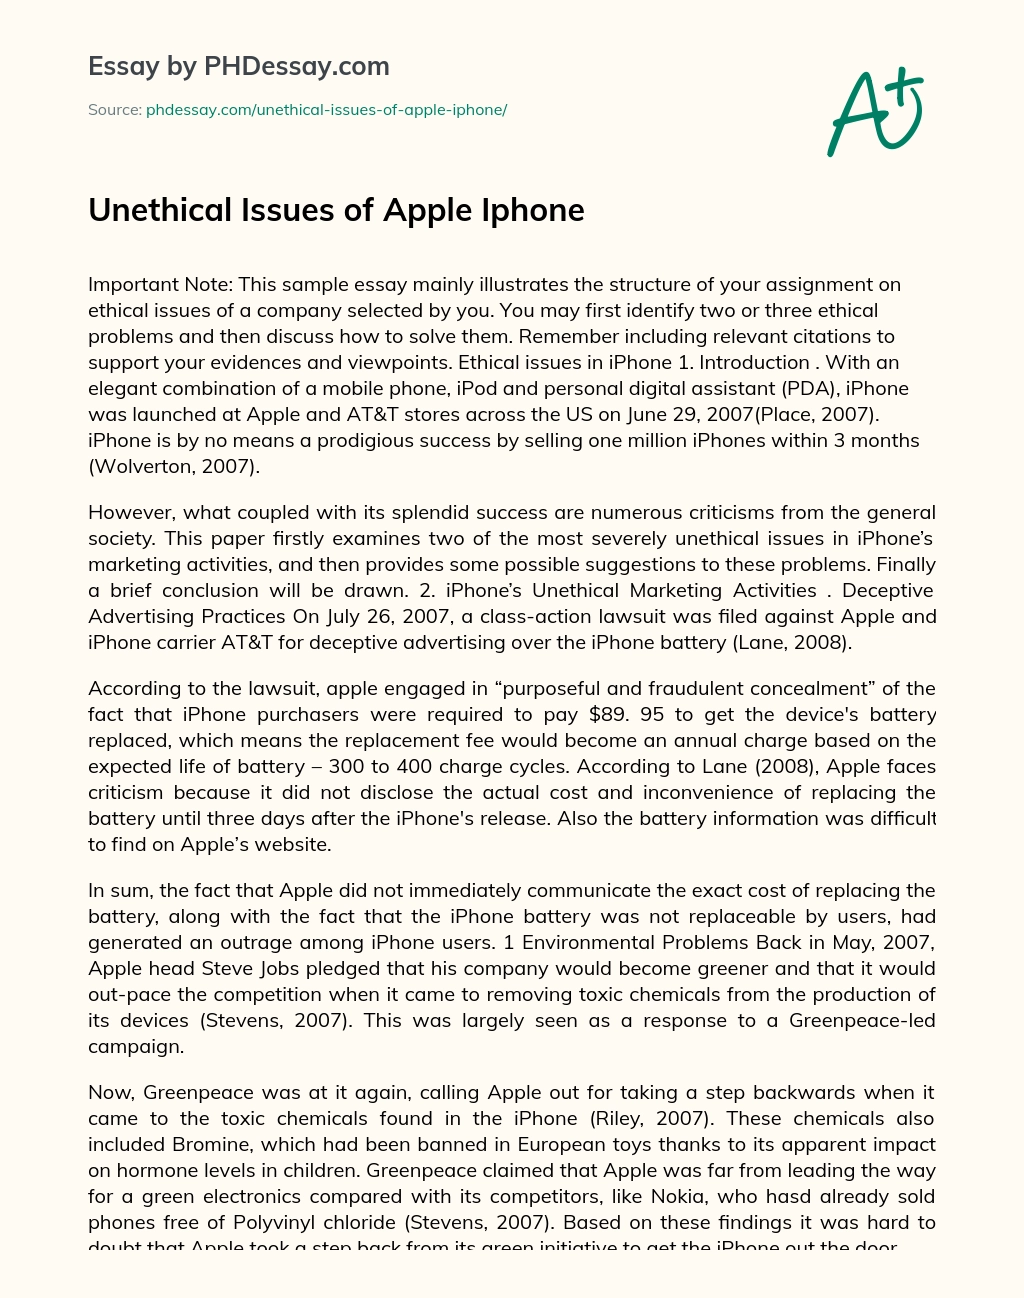 Unethical Issues of Apple Iphone essay